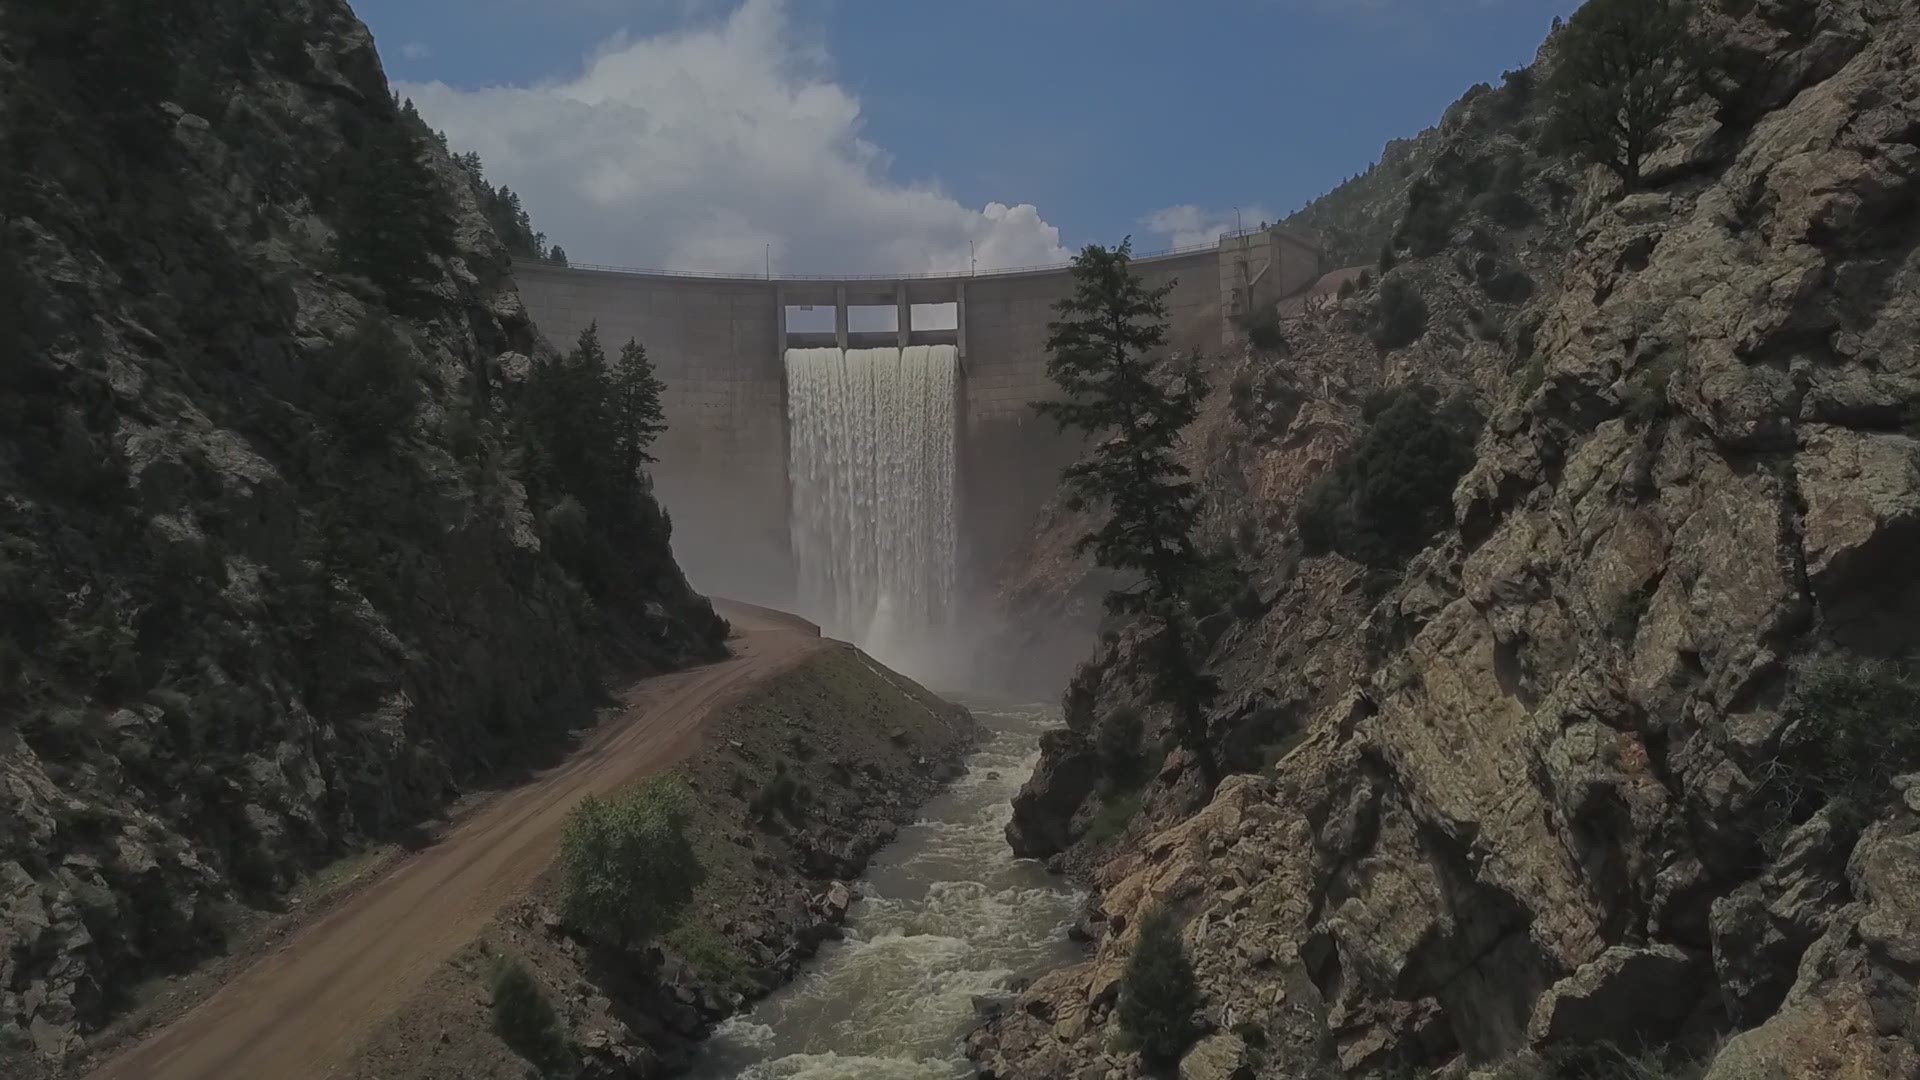 The dam at Strontia Springs is spilling over in a mesmerizing and dramatic fashion.